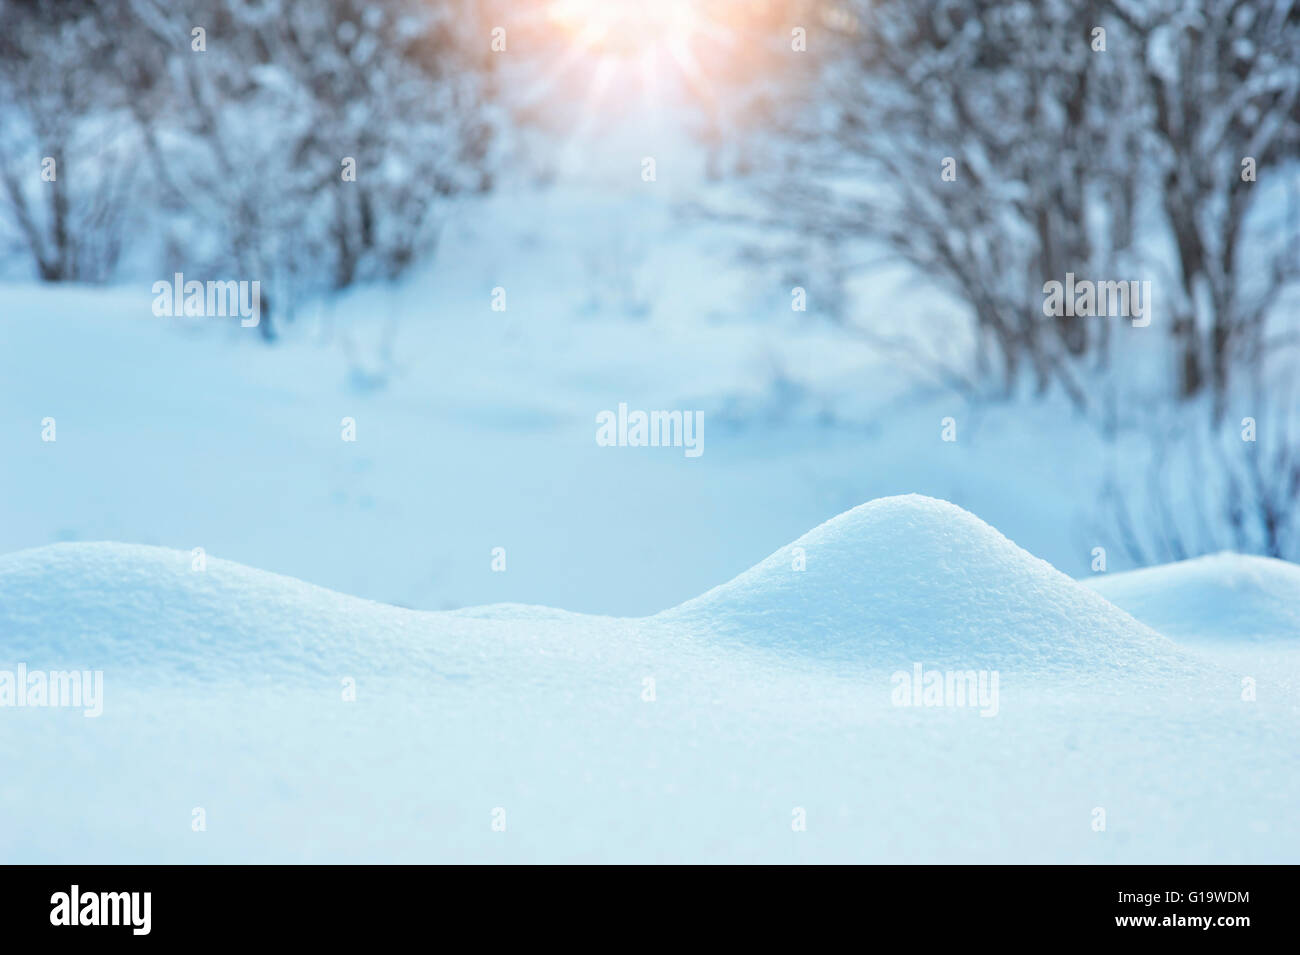 Winter background with a snowdrift and sun Stock Photo